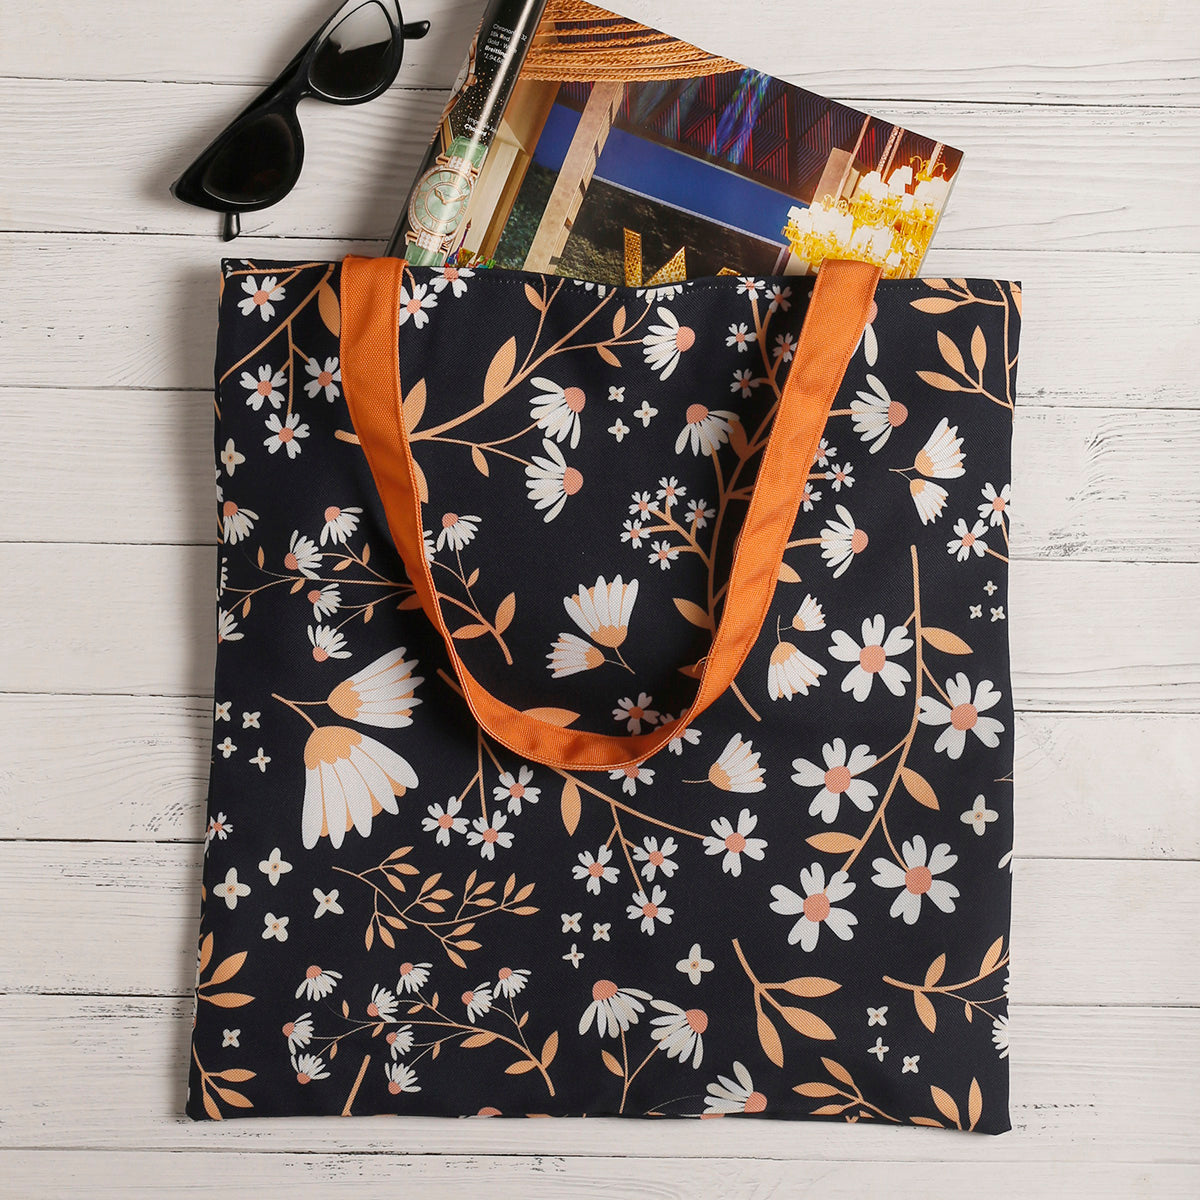 A black tote bag with white and orange floral pattern, orange handles, filled with items such as sunglasses, magazine, and a golden crown, lying on a white wooden surface.